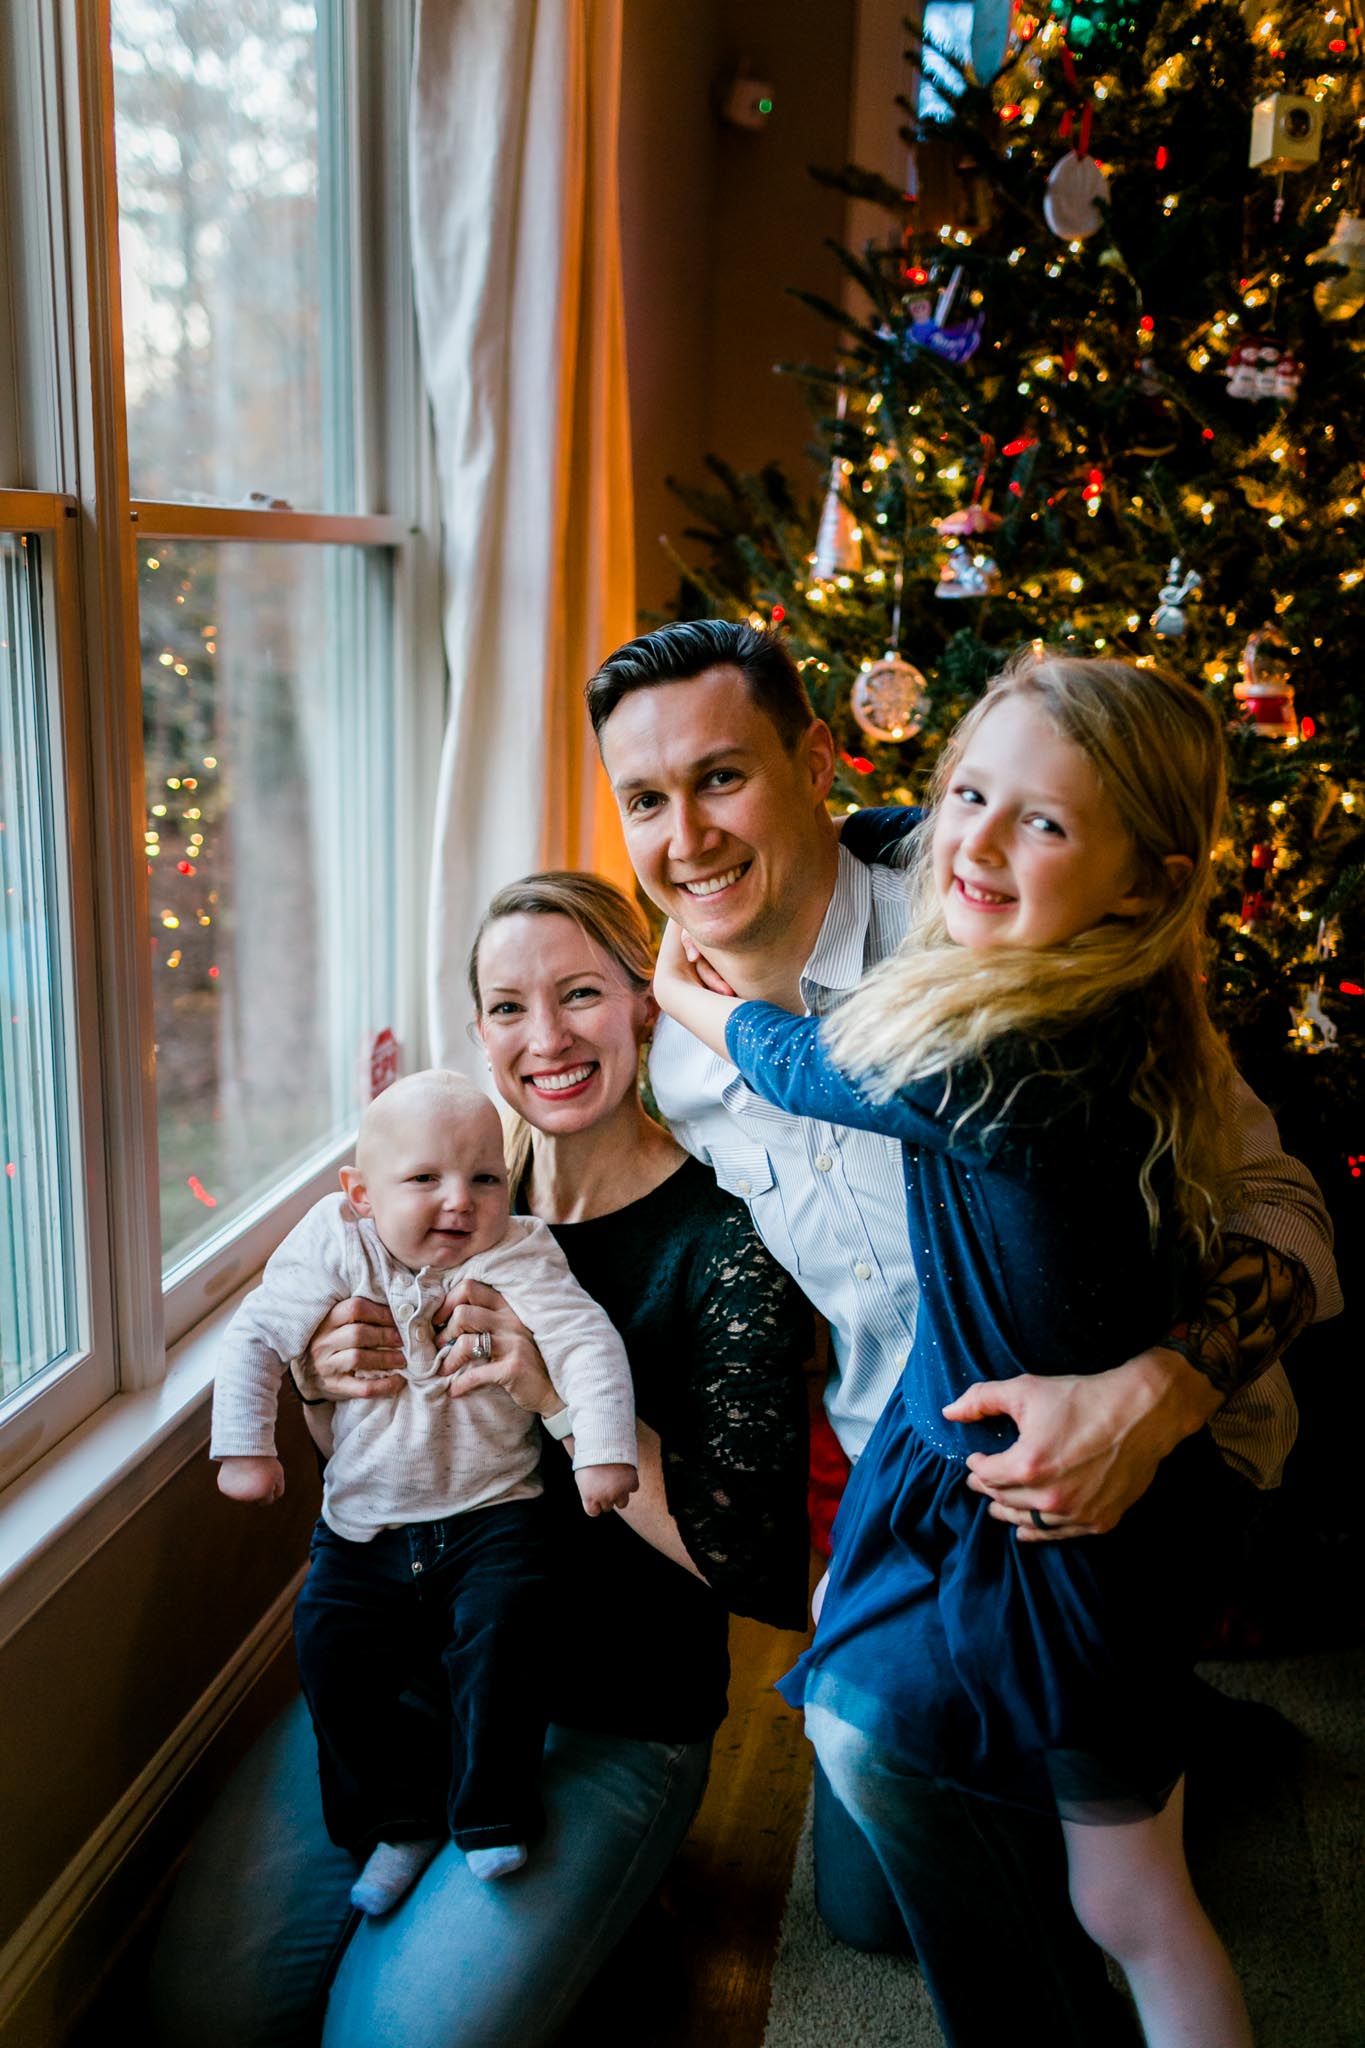 Family photo by Christmas Tree | By G. Lin Photography | Durham Photographer